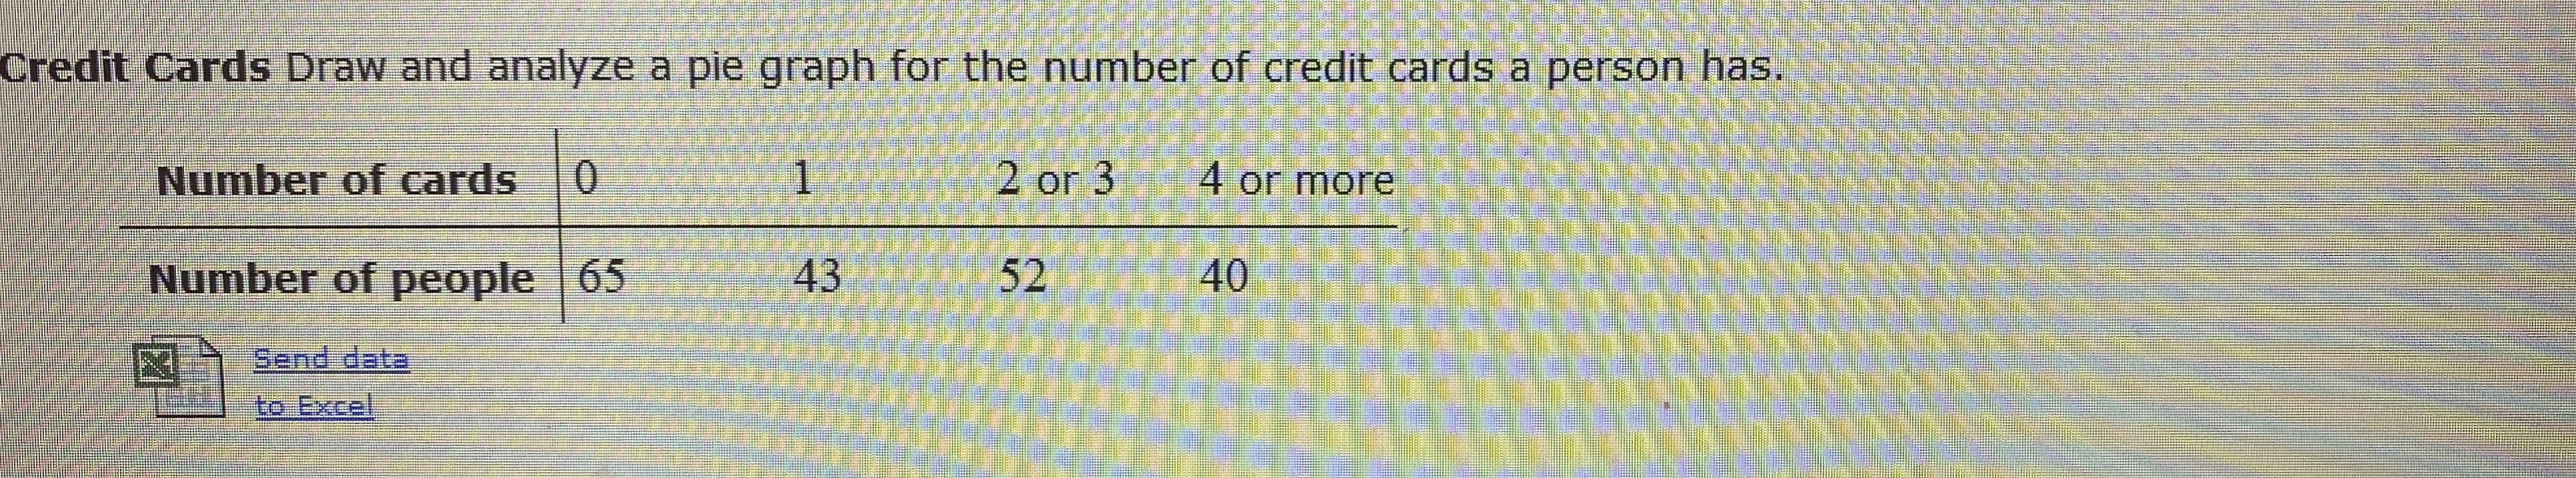 Credit Cards Draw and analyze a pie graph for the number of credit cards a person has.
Number of cards
2 or 3
0.
1
4 or more
40
43
Number of people
52
65
Send data
to Excel
